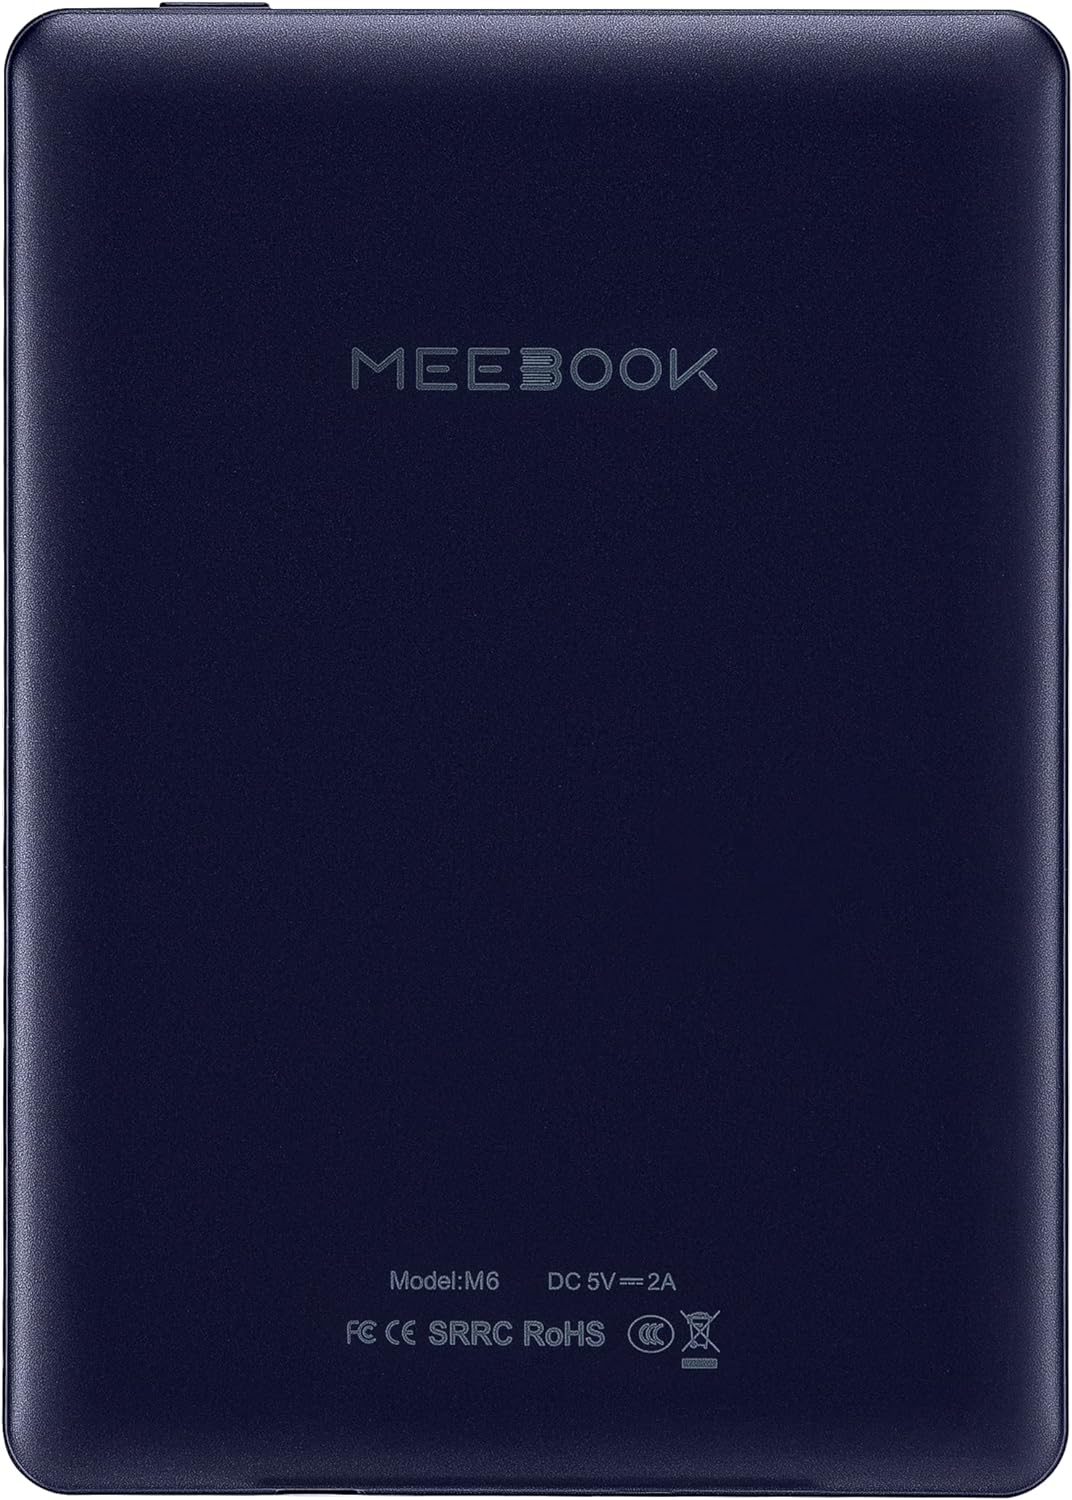 LIKEBOOK(Meebook) 6インチEink電子書籍リーダー[M6], ポケットサイズ+クアッドコア1.8 Ghzプロセッサ + 3GB  RAM+ 32GB 内部ストレージ、Android 11、Wifi、Blutooth、Micro SDカードスロット【電子書籍リーダー本体+ 